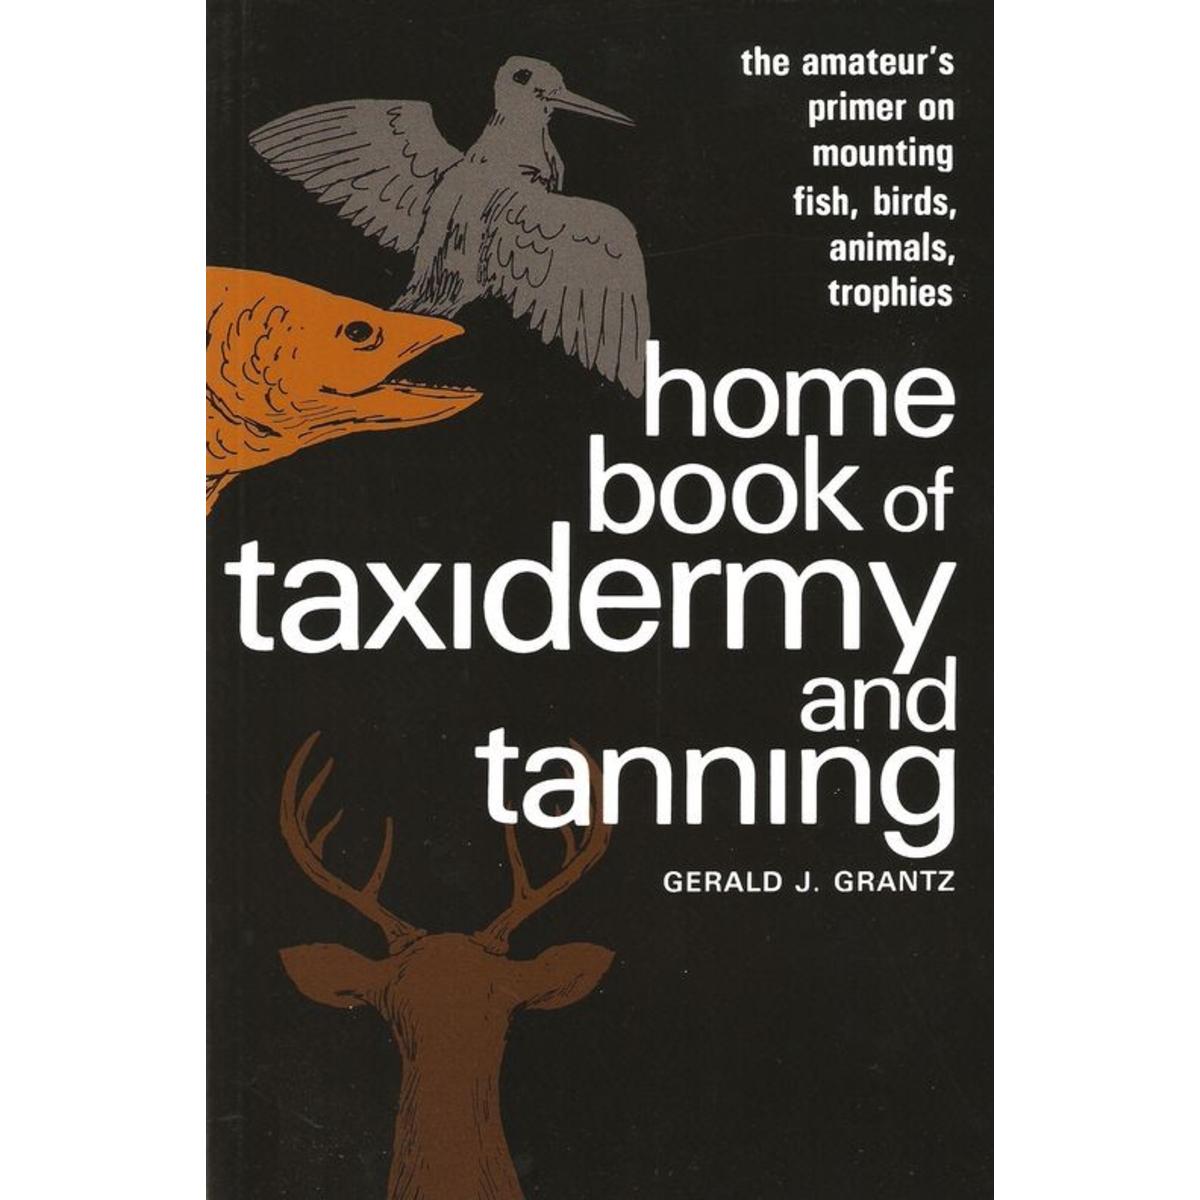 Home Book of Taxidermy and Tanning by Gerald J Grantz 9780811722599 eBay